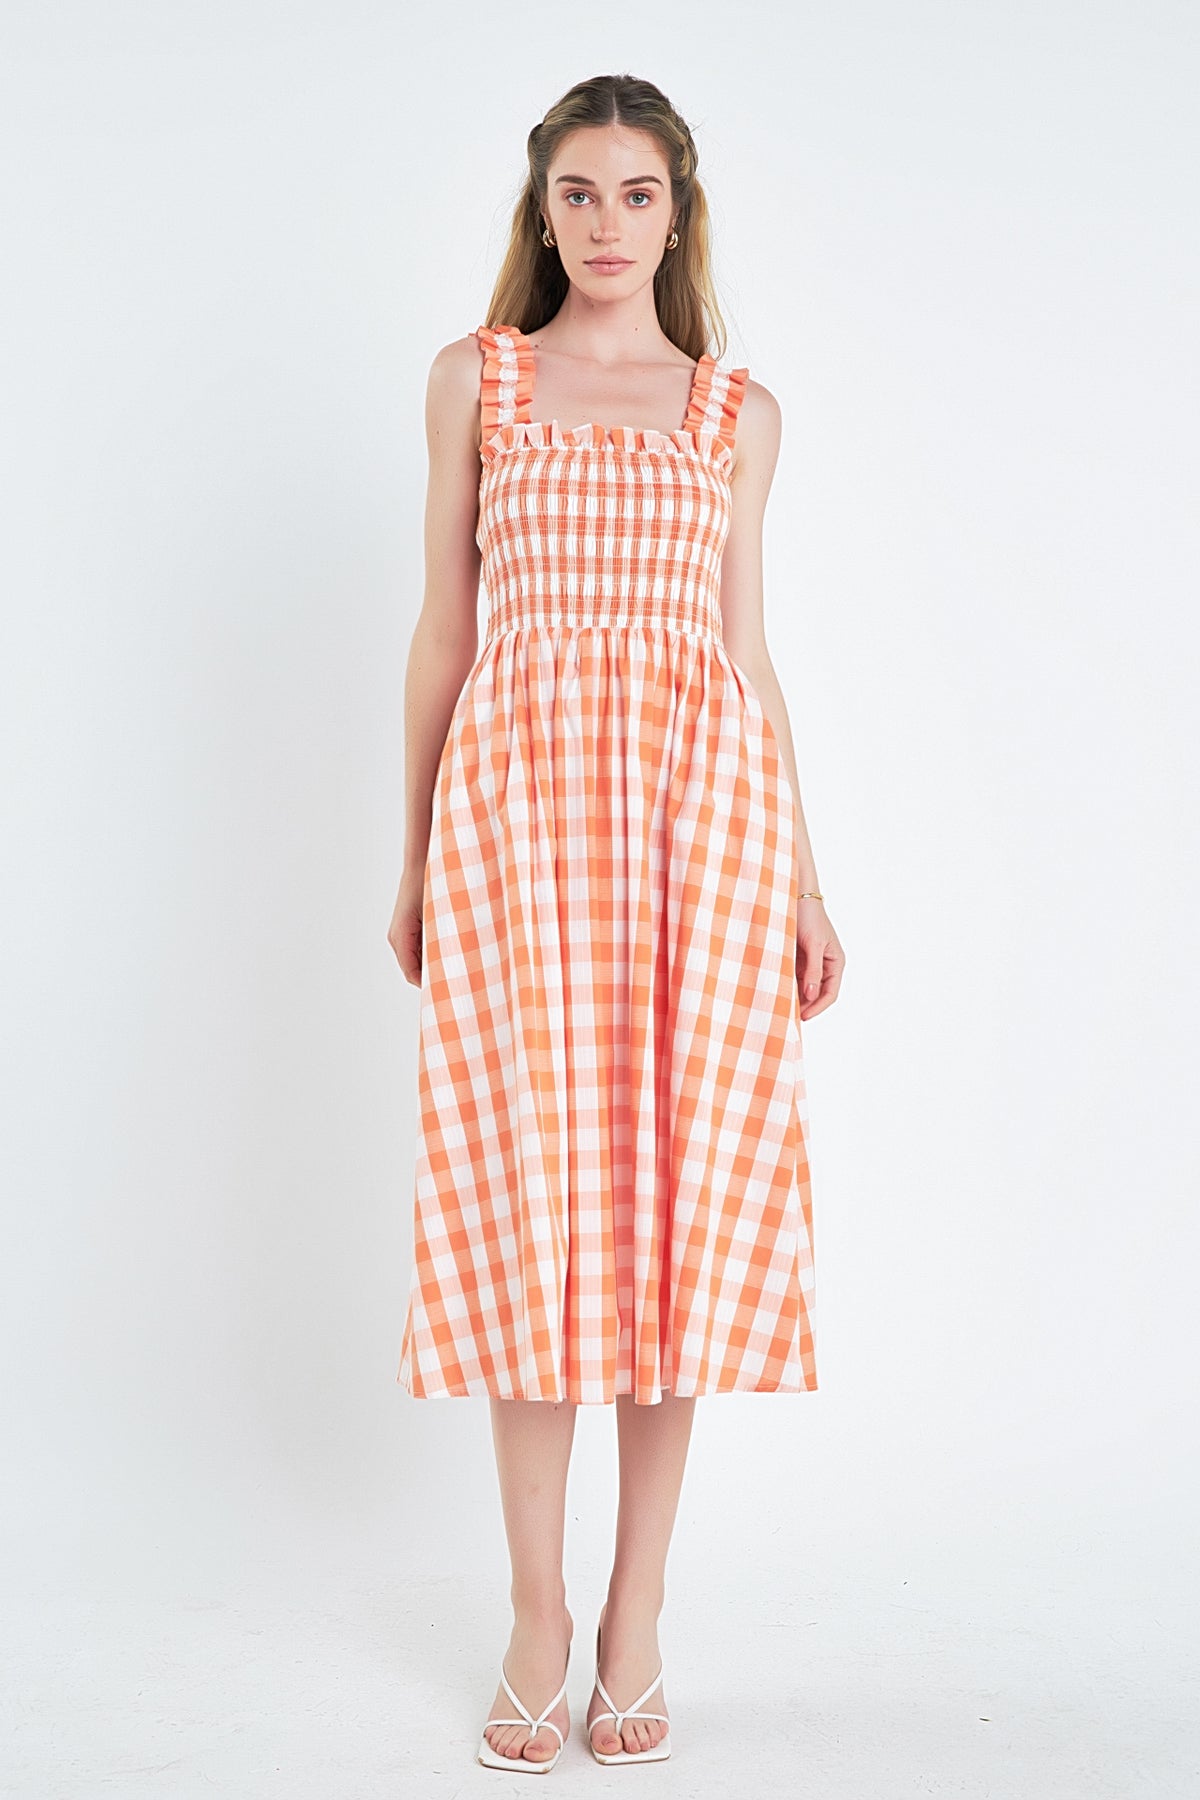 ENGLISH FACTORY - Check Print Smocked Dress - DRESSES available at Objectrare